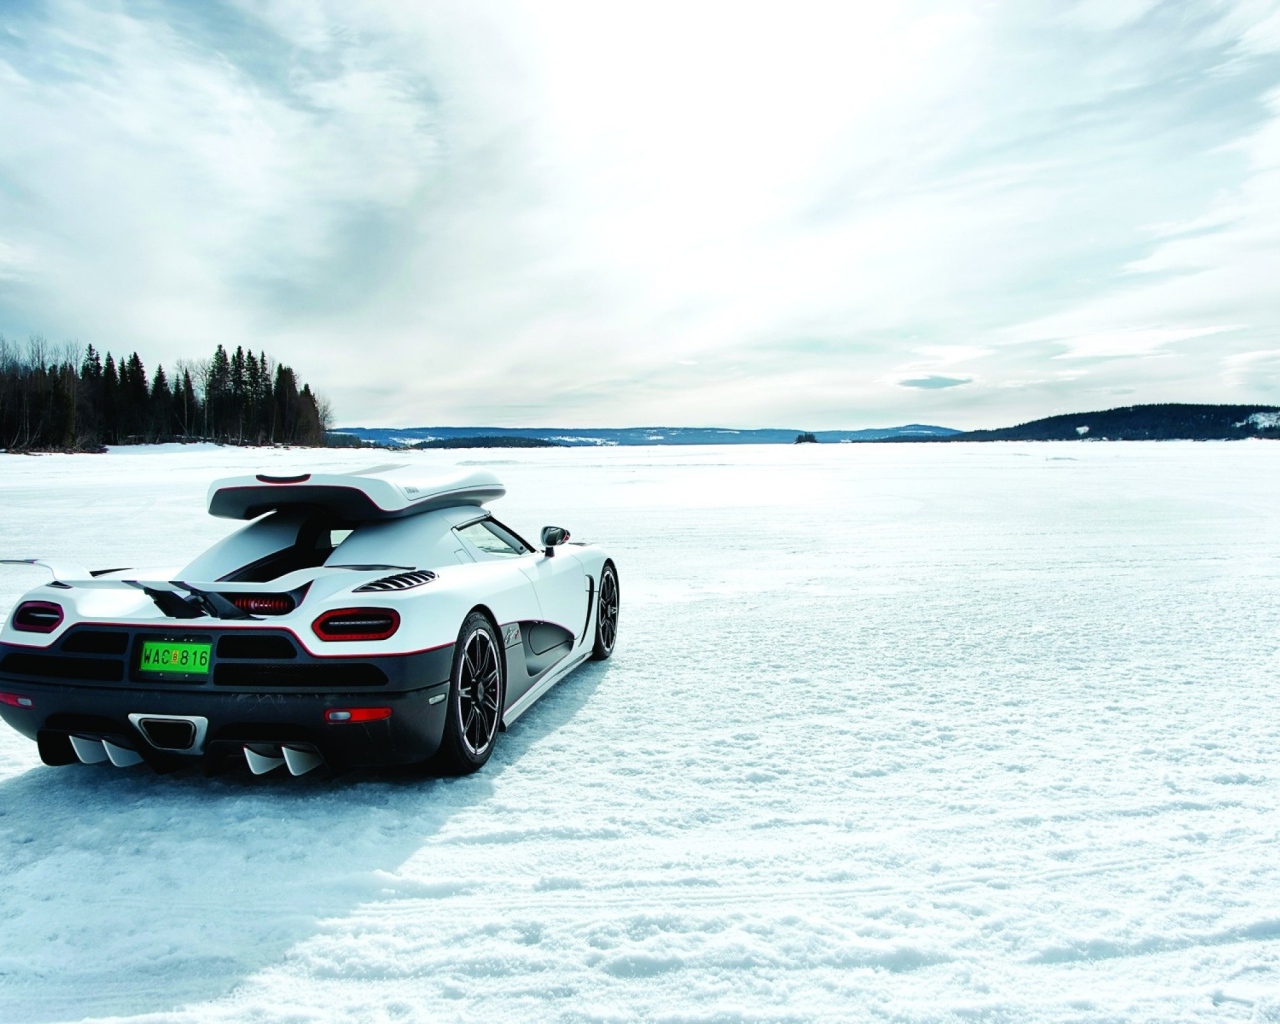 White Koenigsegg on a snow-covered field